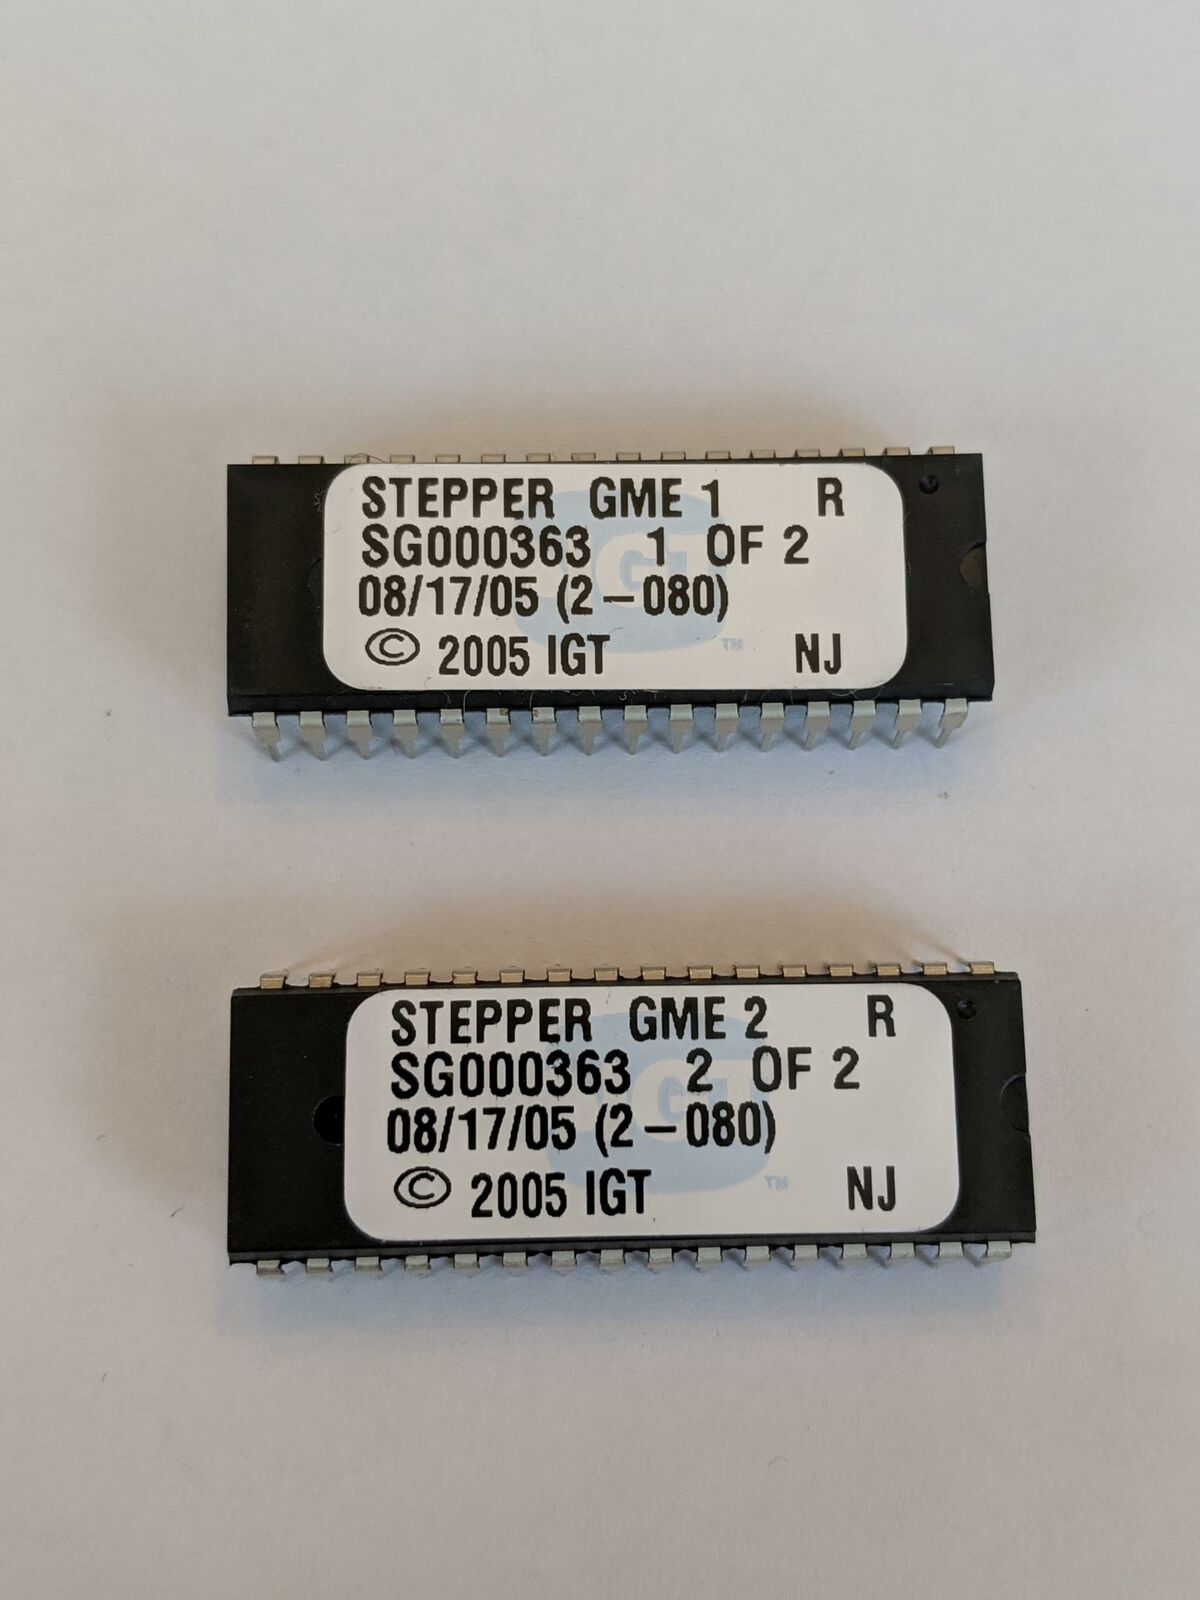 IGT Stepper GME 2 Eprom SG000363 Game 1 of 2 & 2 of 2 Set